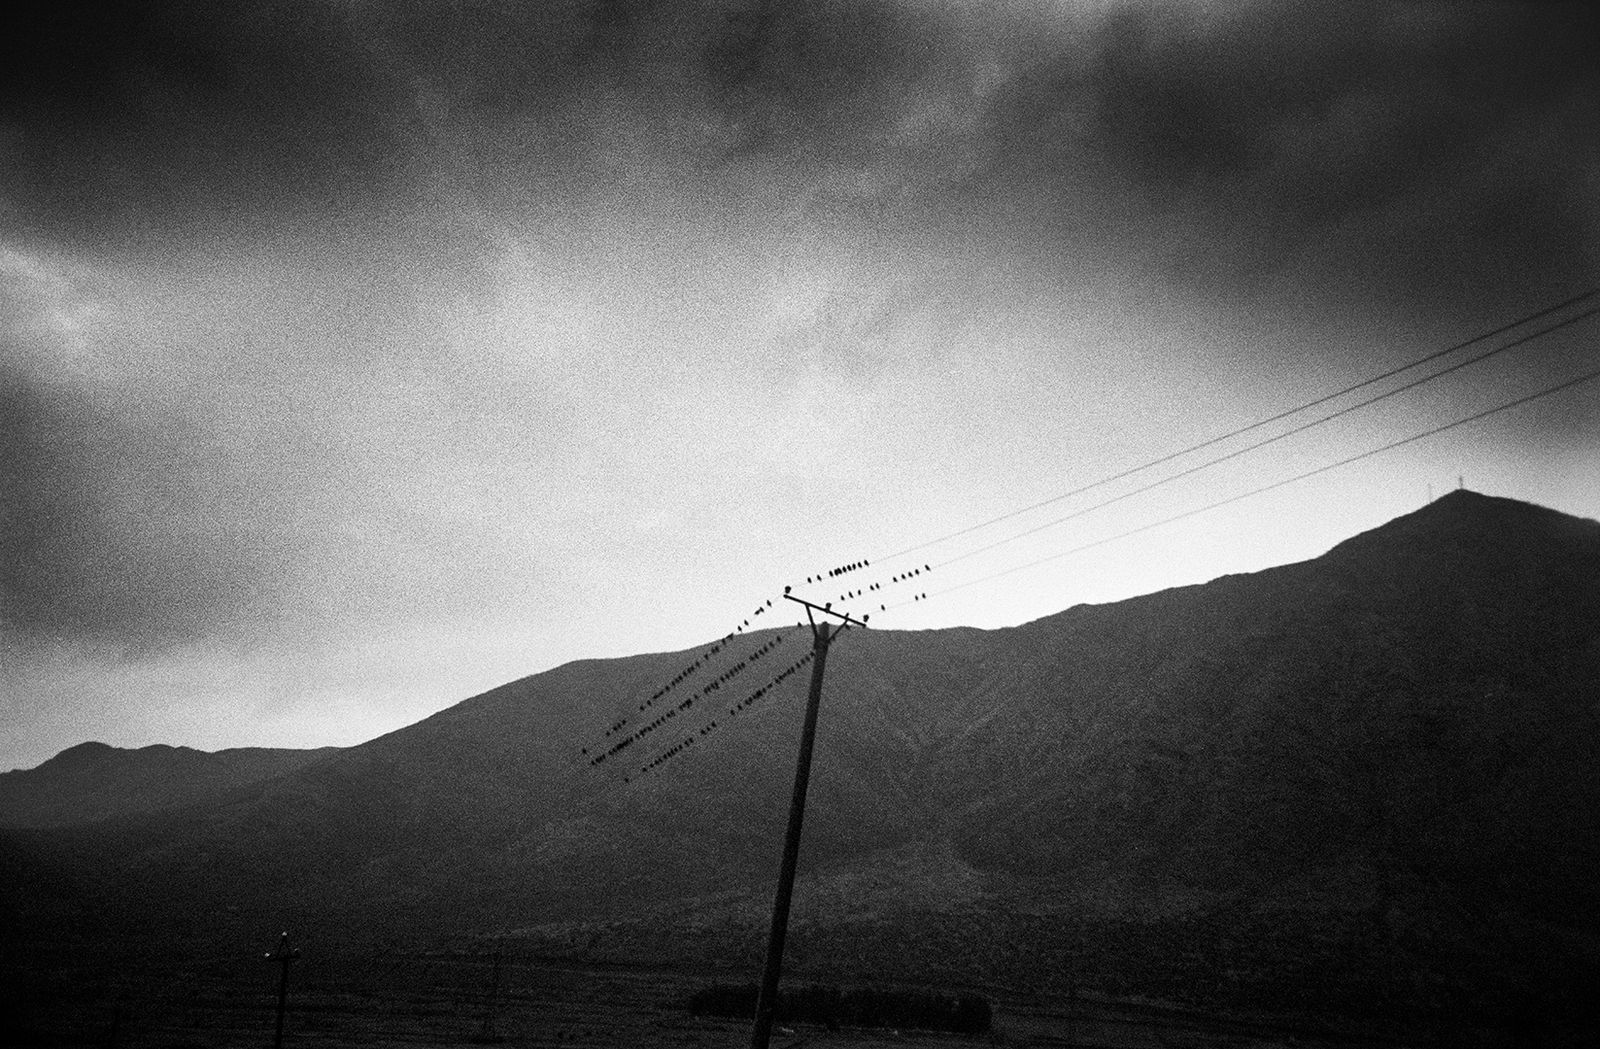 © Elton Gllava - Image from the Where the crows would have sung photography project